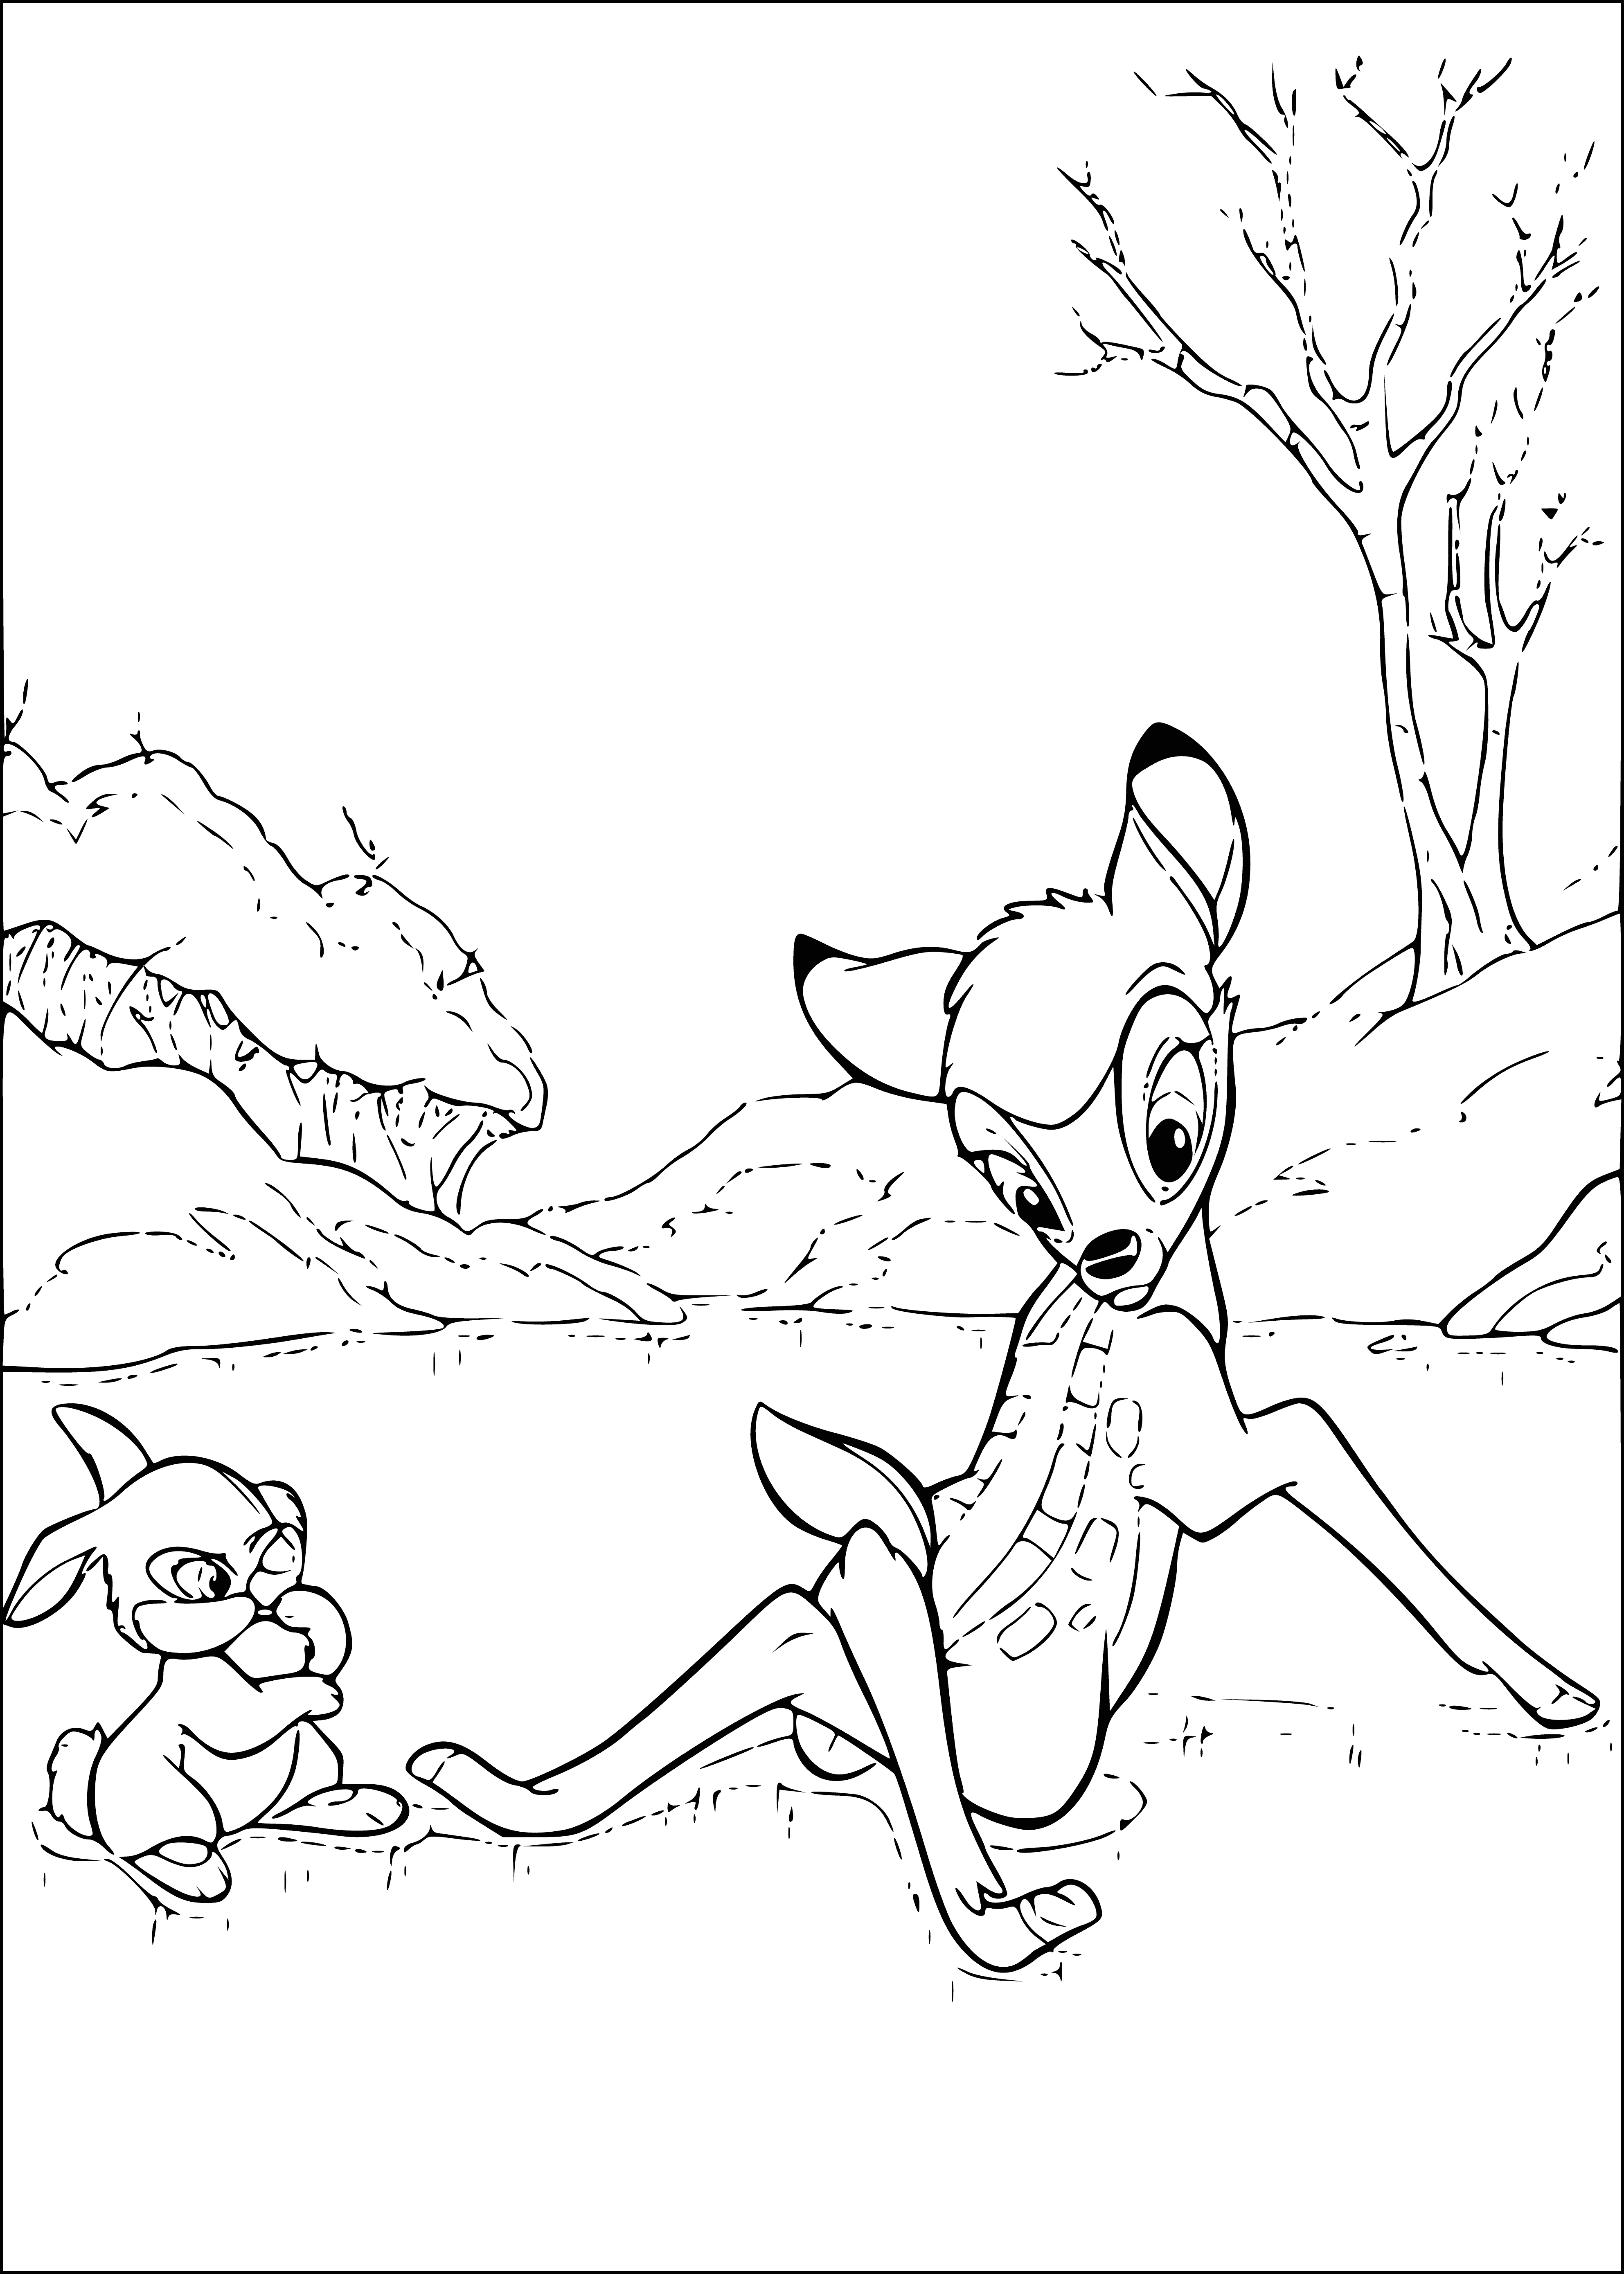 coloring page: Bambi and a hare have fun playing on a frozen lake with sunshine and a blue sky. #WinterWonderland